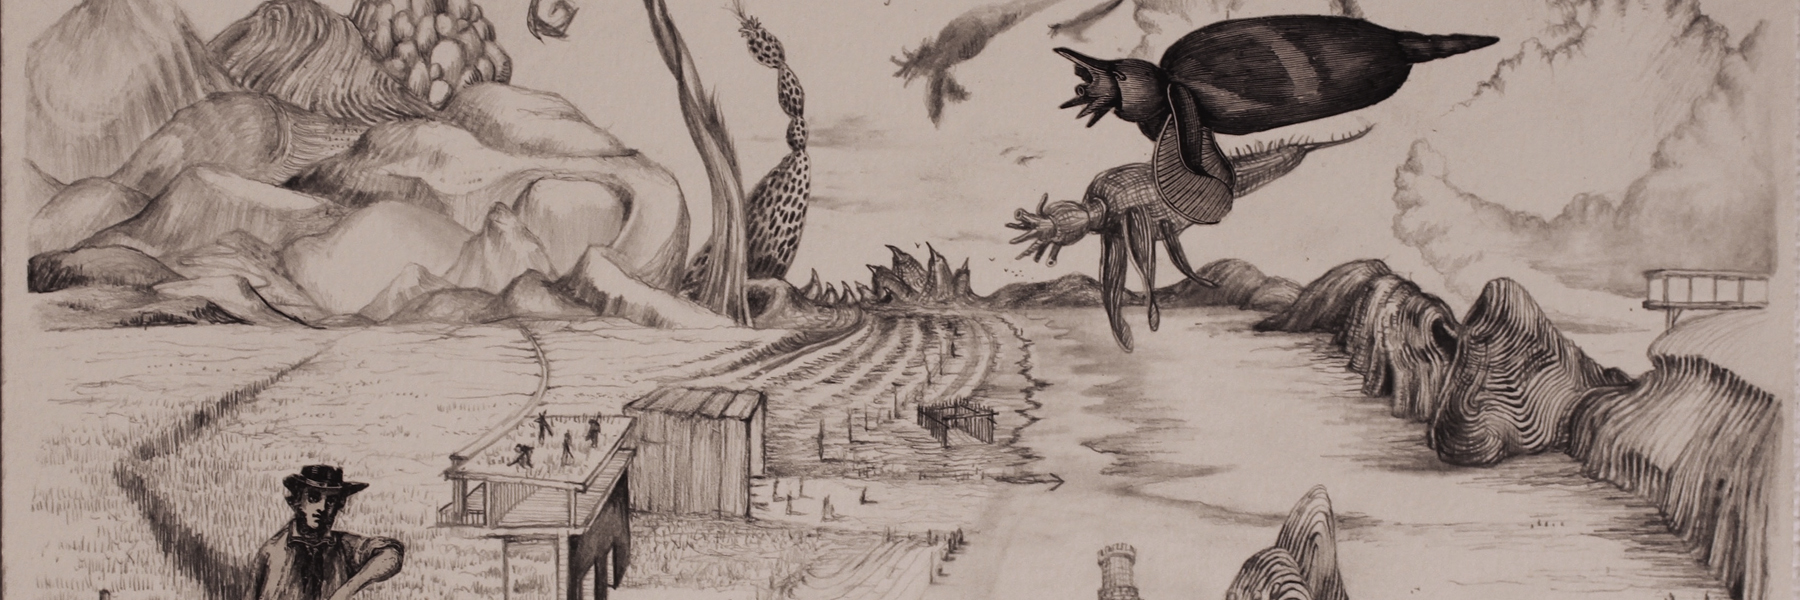 Black and white drawing of a surreal landscape